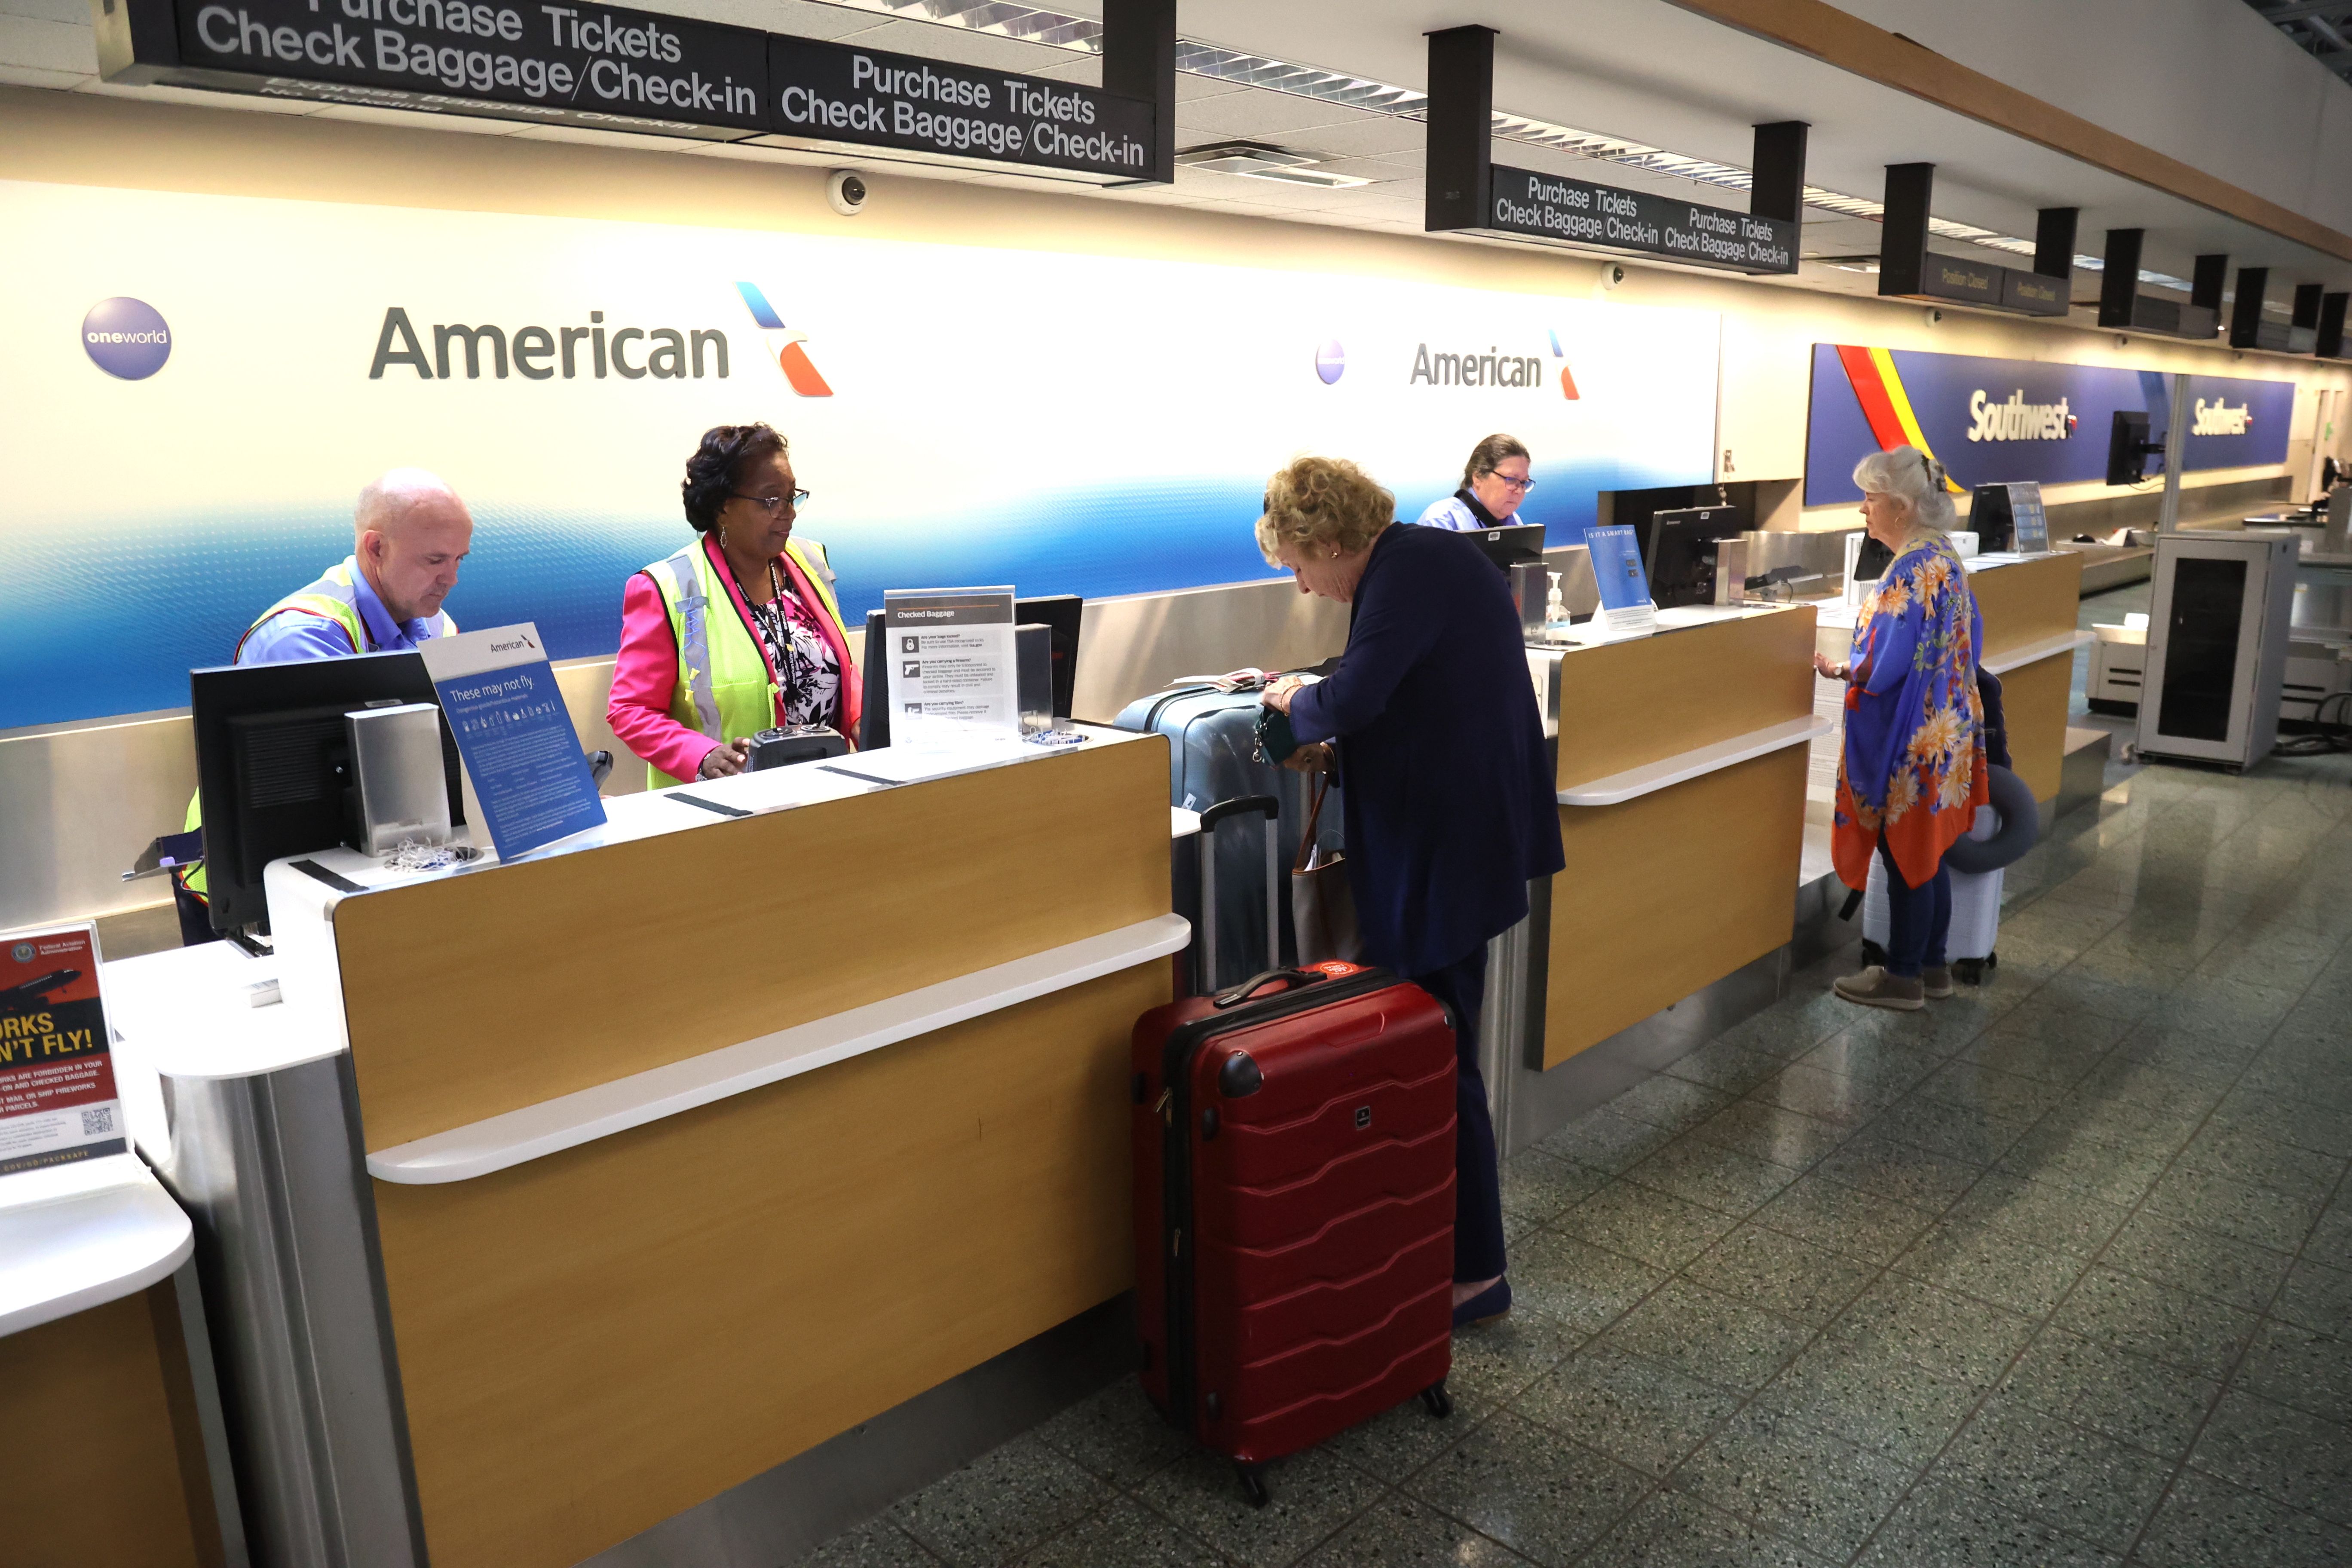 American airlines check in counter at airport